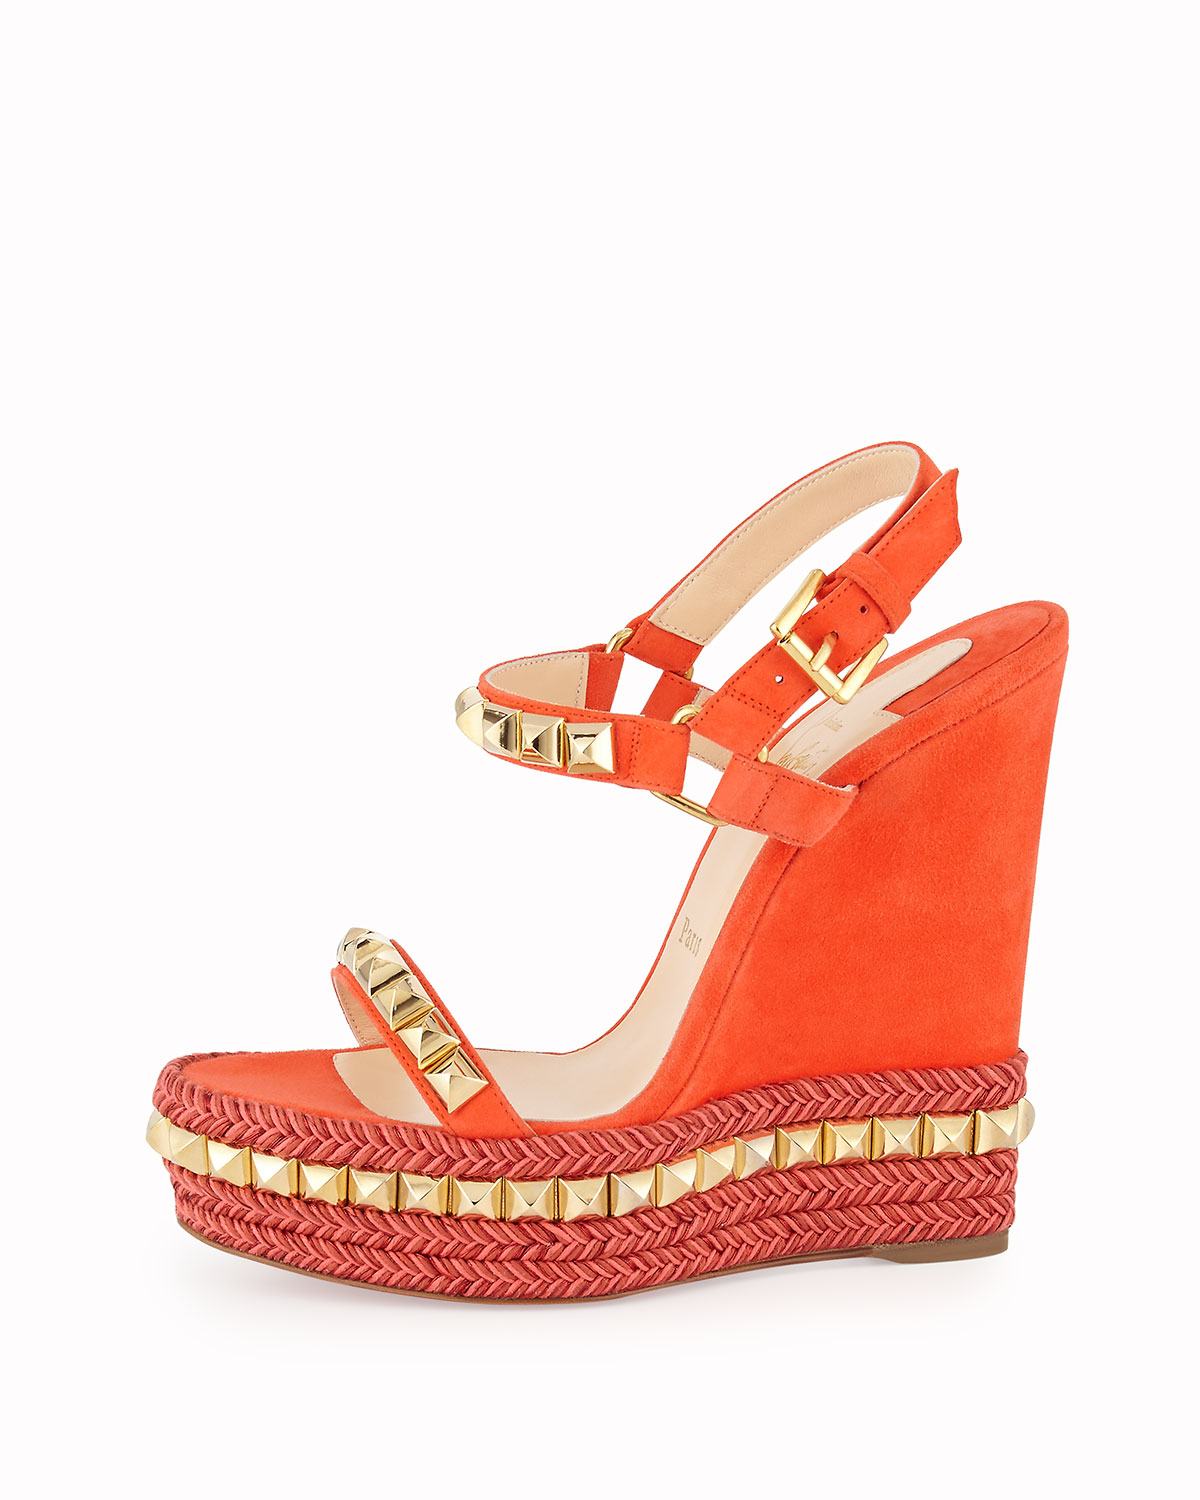 Christian louboutin Cataclou Studded Suede Red Sole Wedge Sandal ...  